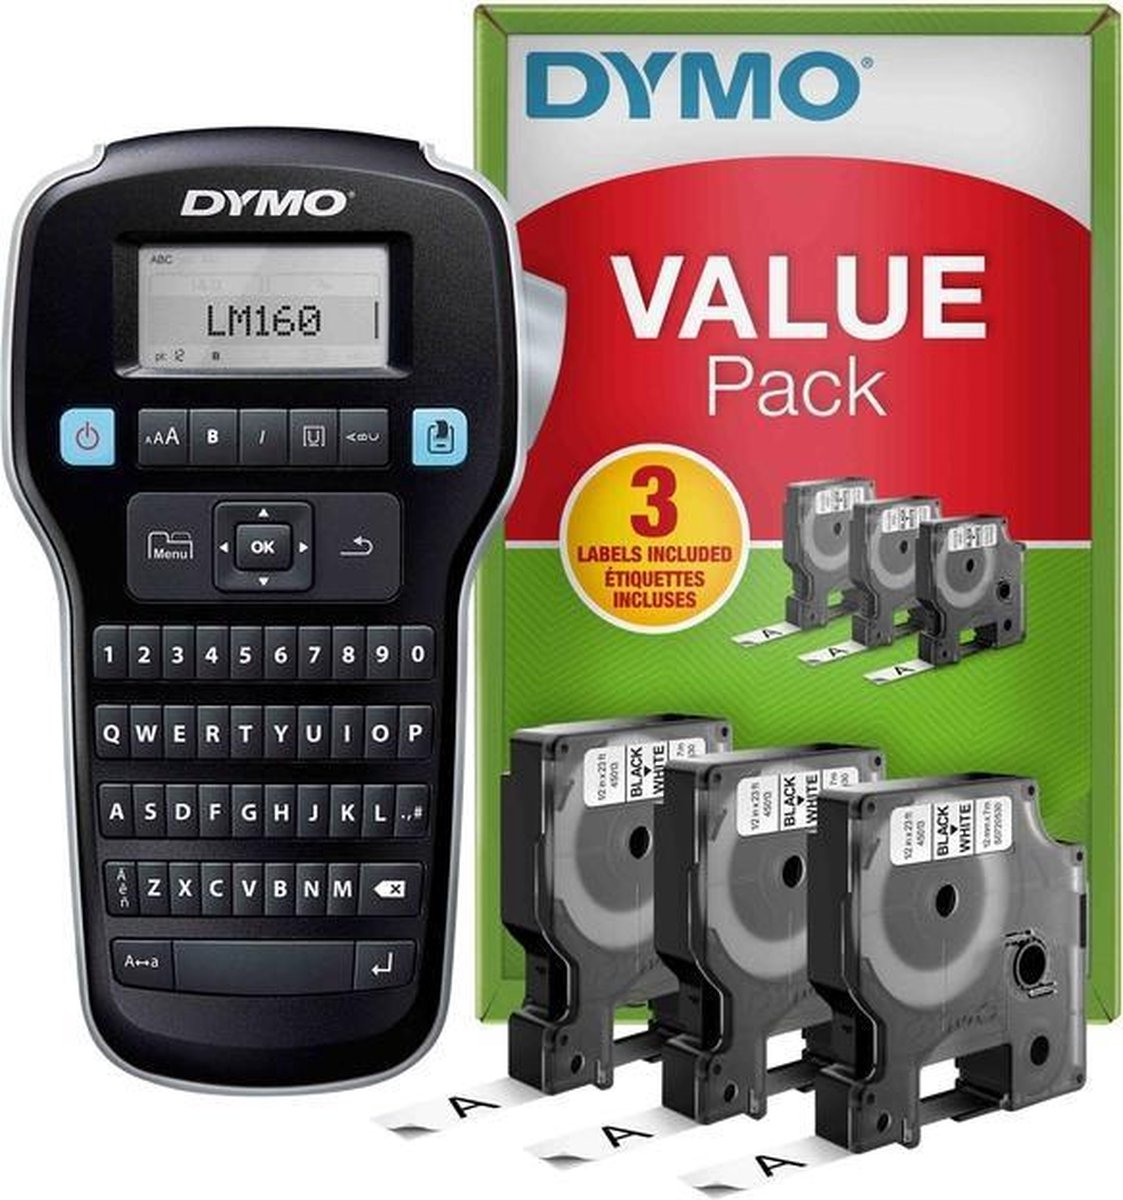 Dymo Label Manager 160 - Value Pack incl 3 D1 tapes in blister - QWERTY